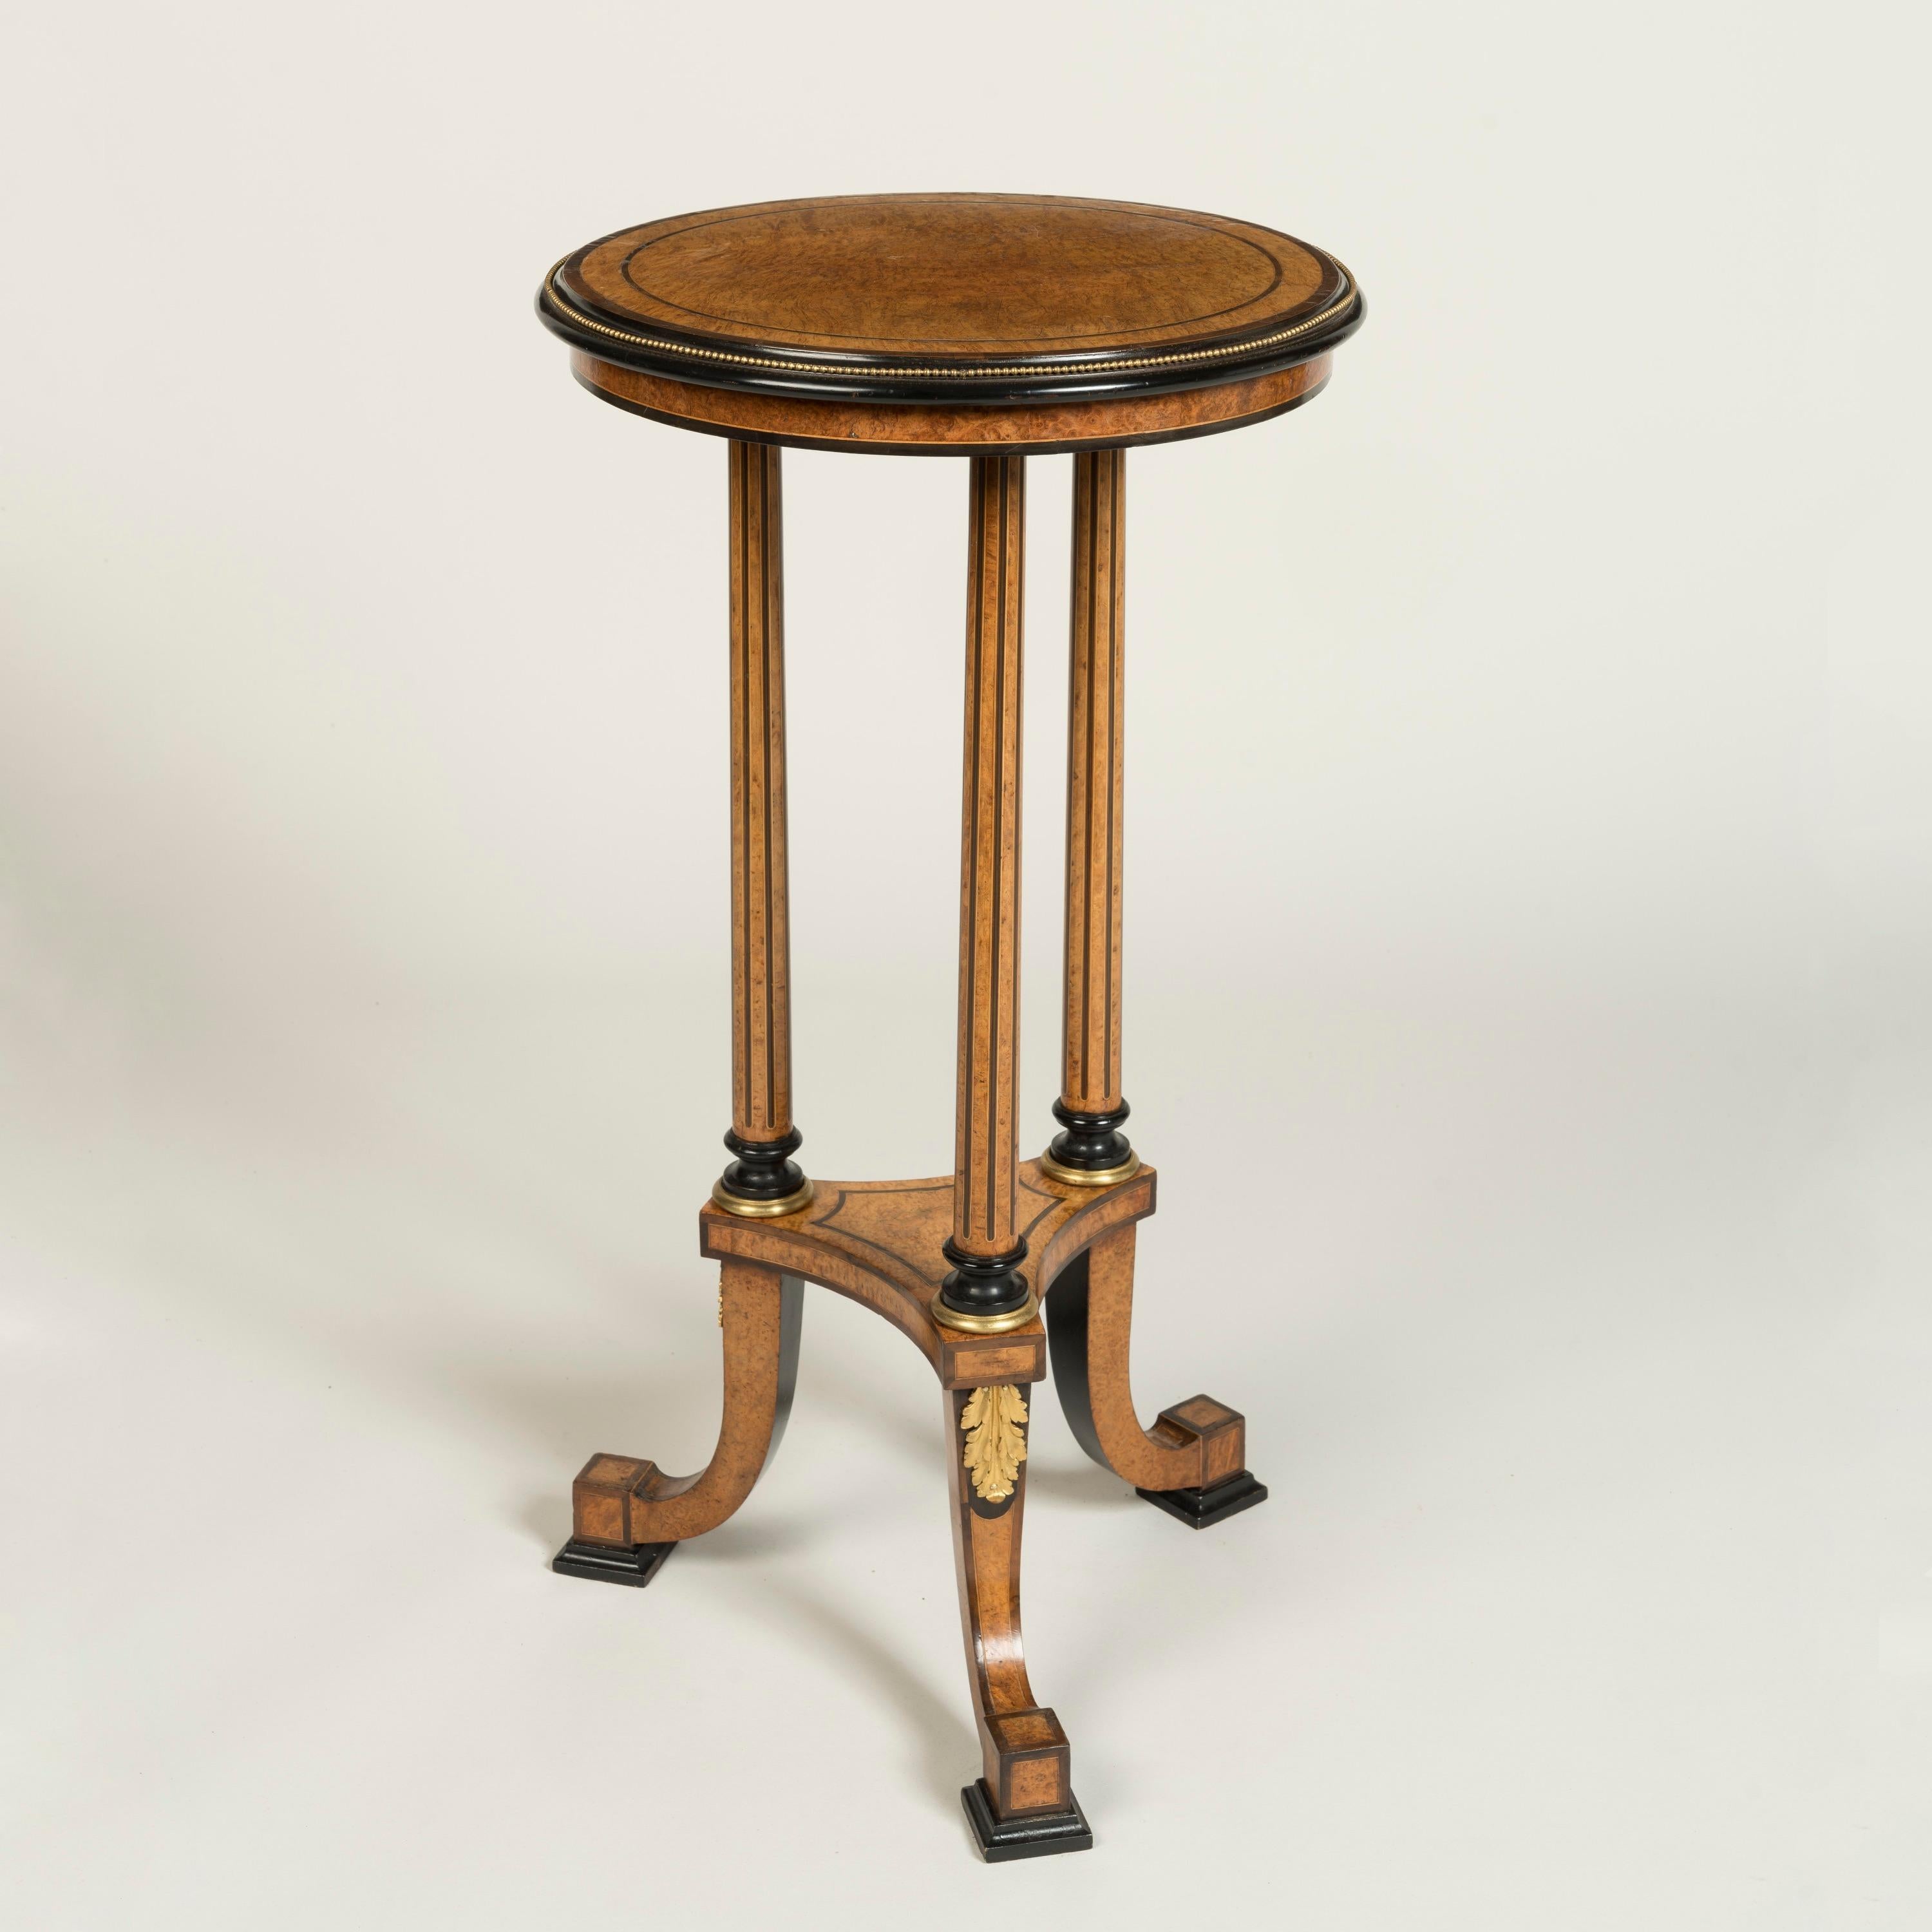 Of beautiful construction from burr walnut, ebony and specimen woods with understated ormolu accents, the tripod table rising from curved legs with rectangular cross-section conjoined by an incurved platform, above emanating three stems with fluted